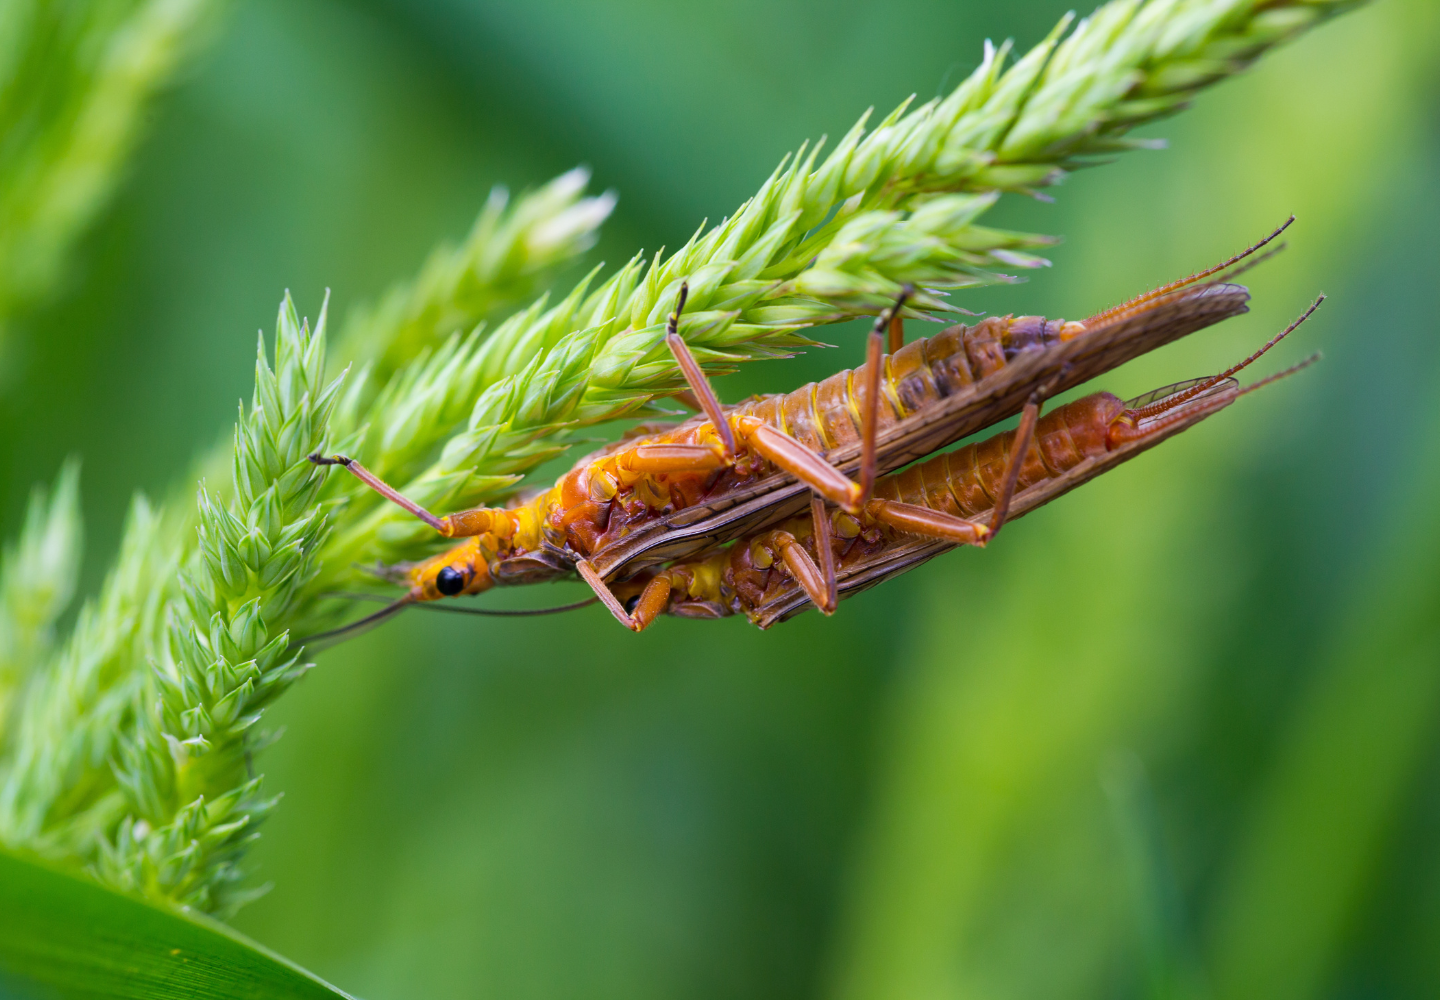 two golden stoneflies perched on a plant with a green background